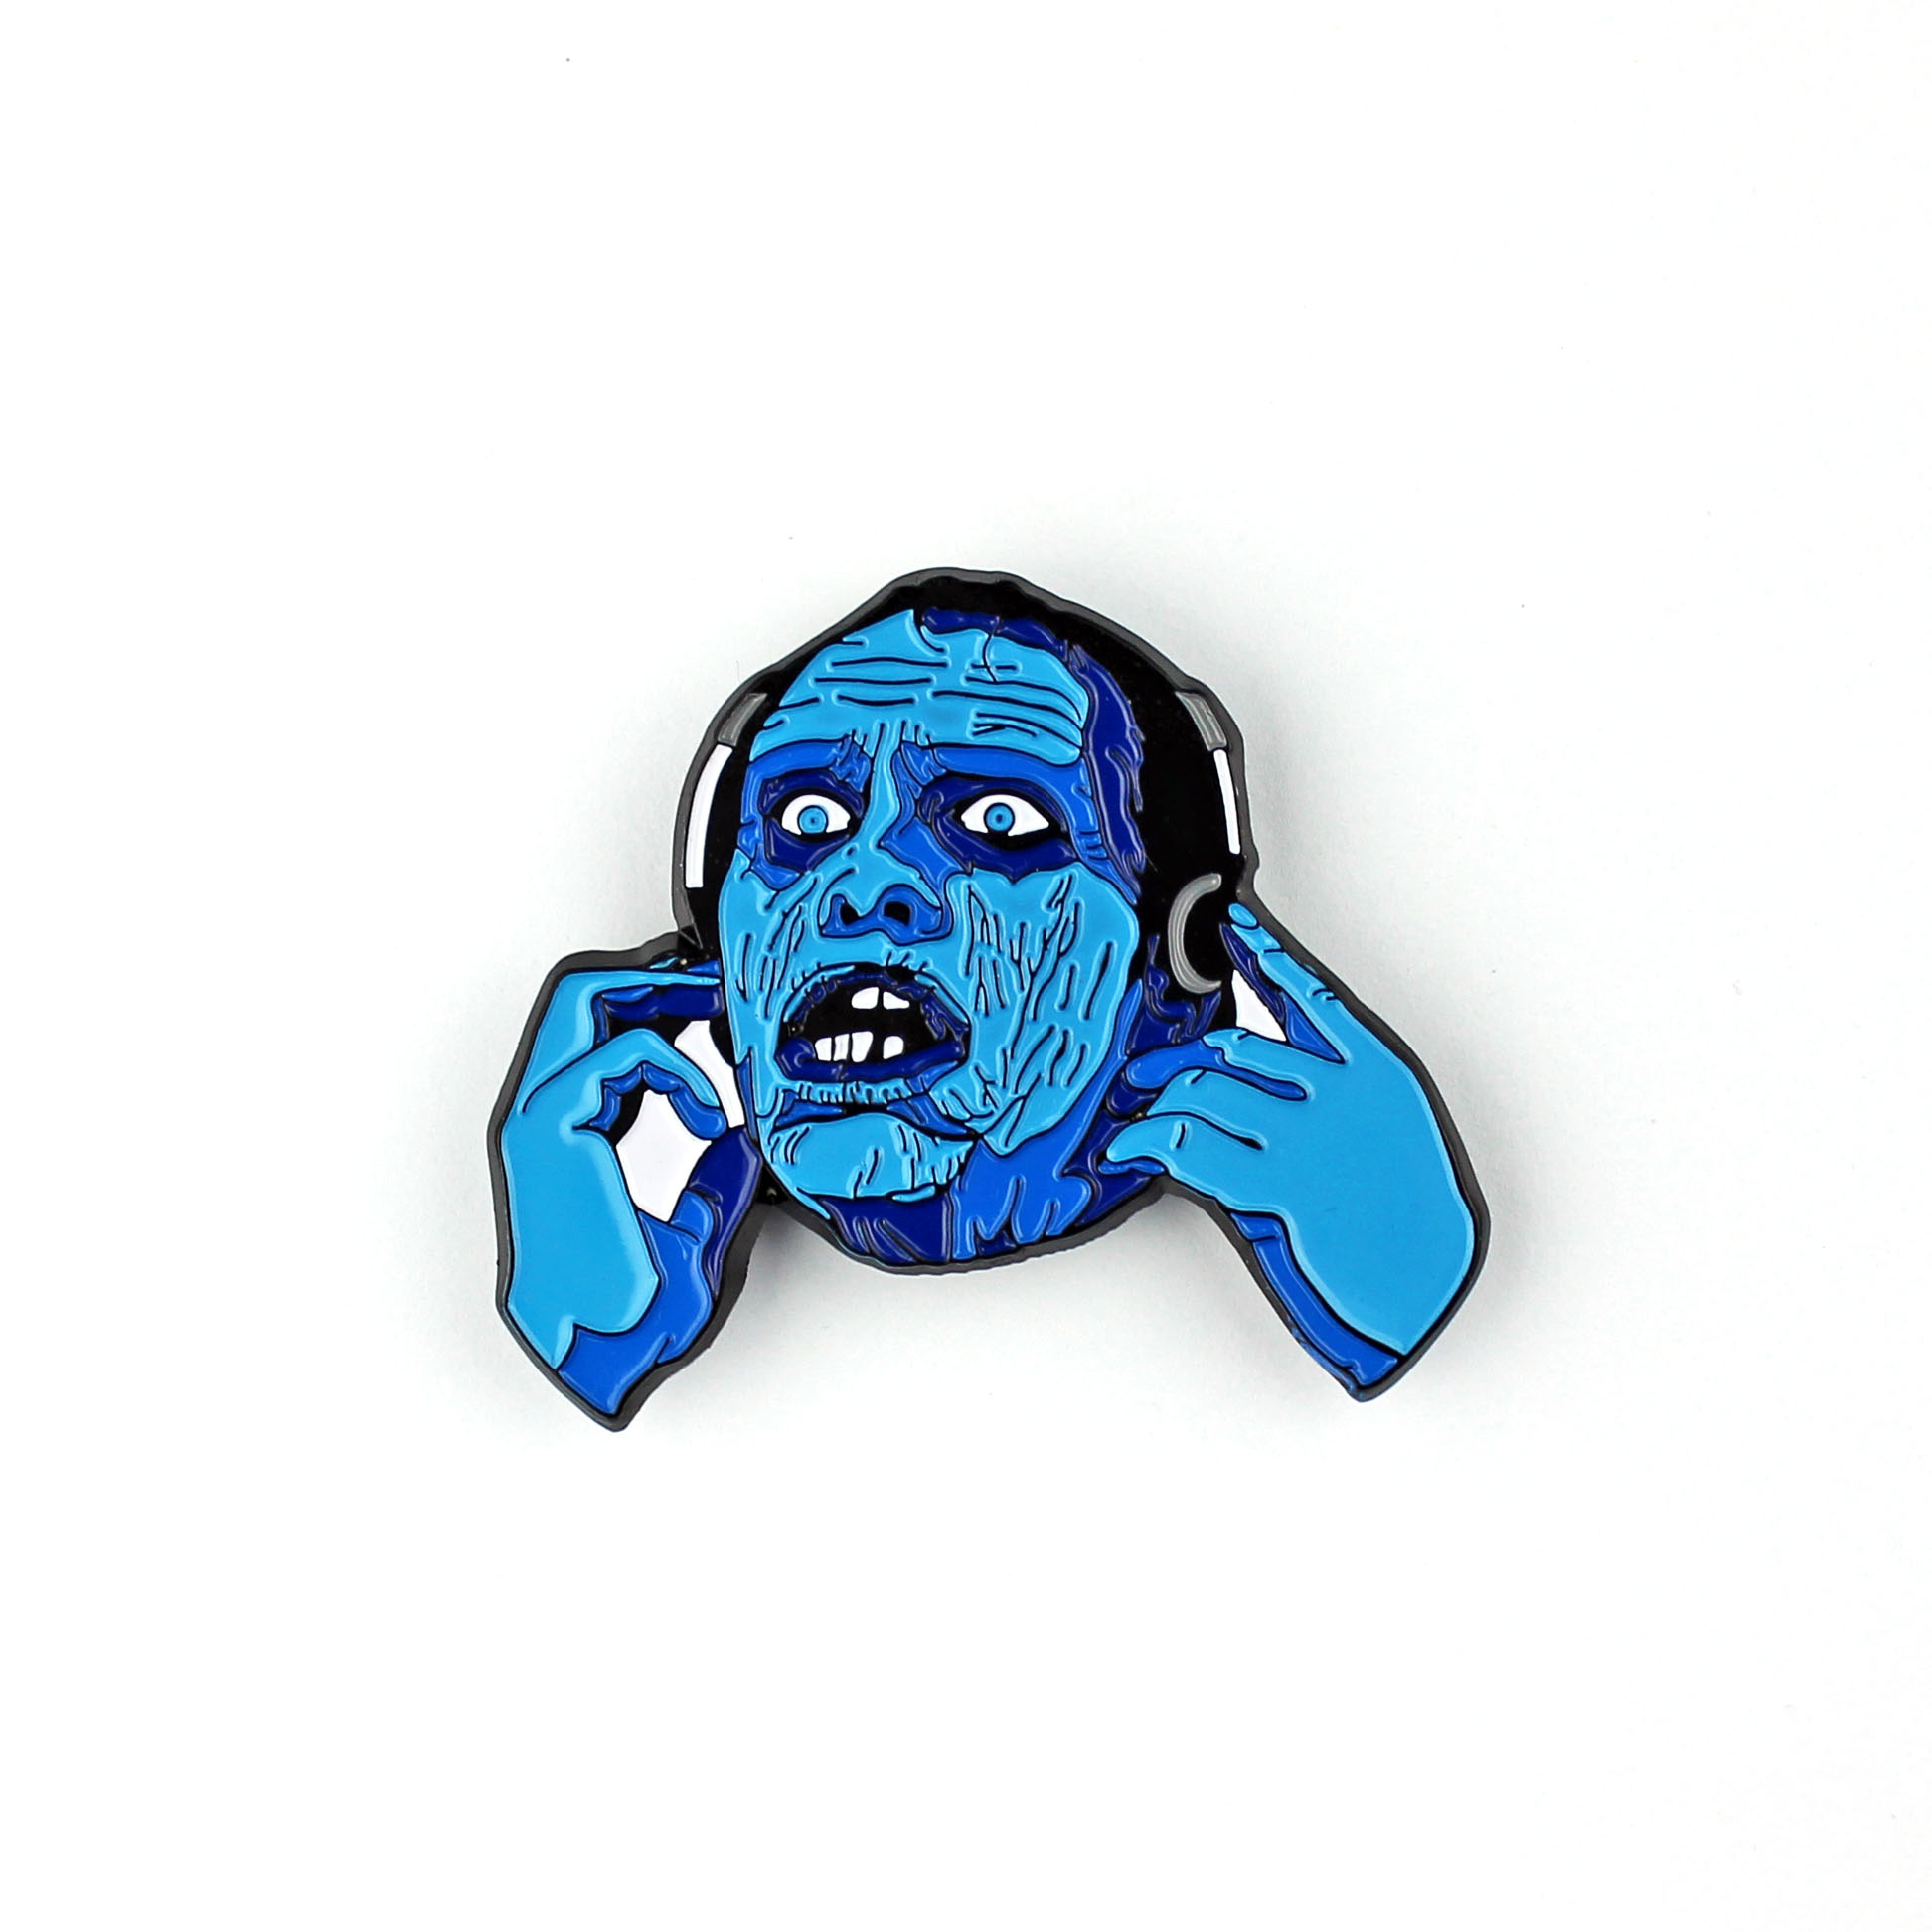 MAKE MY BUB BUBS BOUNCE - Soft Enamel Pin · Exhumed Visions · Online ...